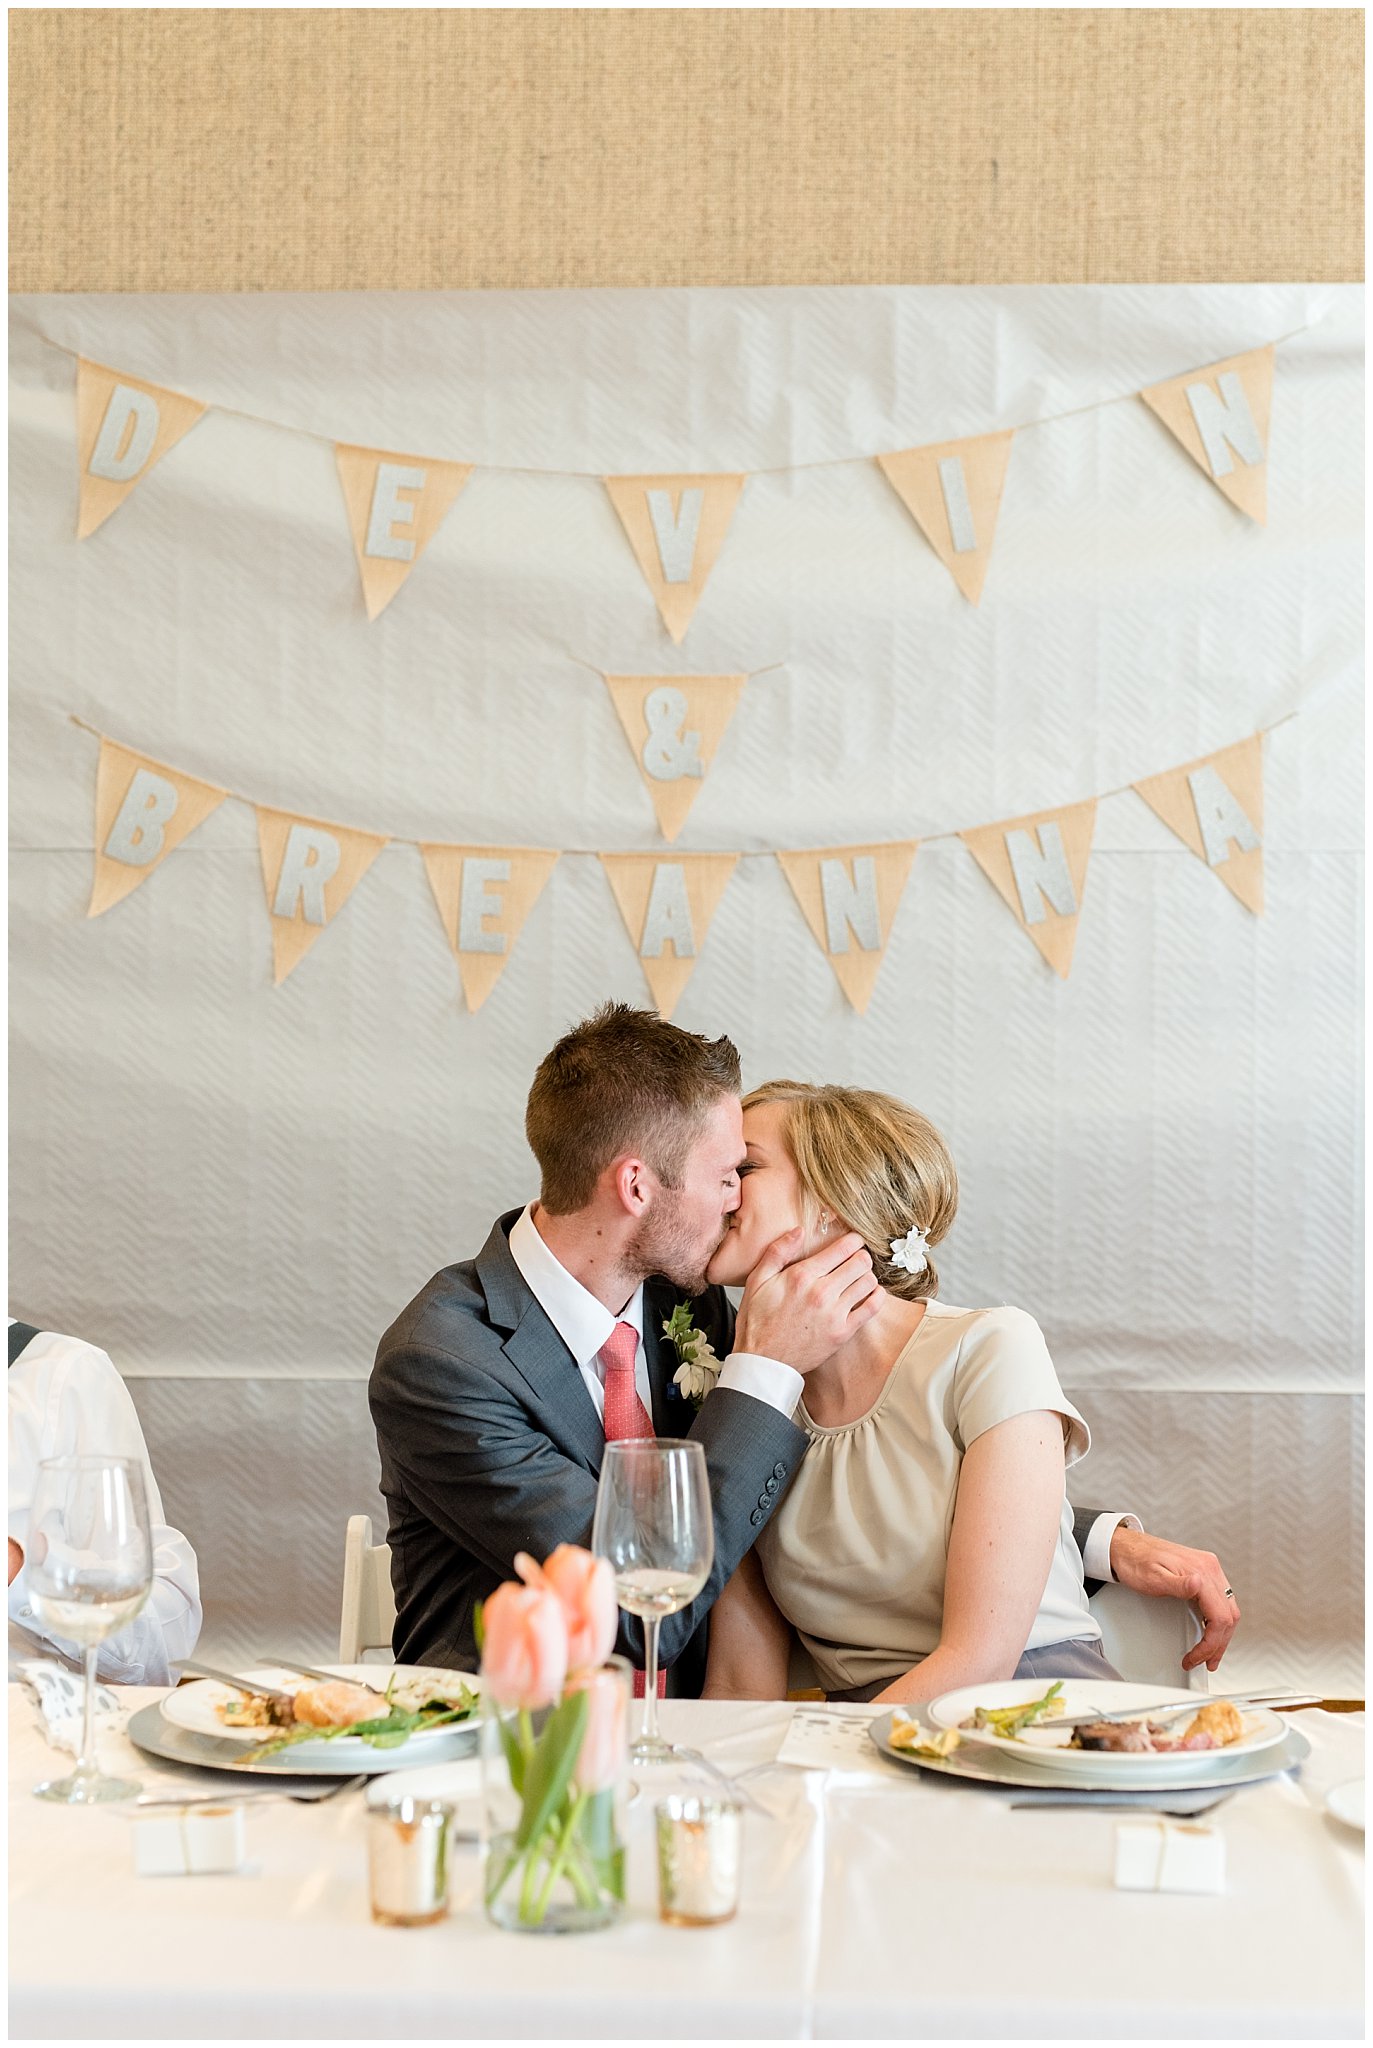 LDS wedding luncheon | Bride and groom sweethearts table | coral and grey wedding